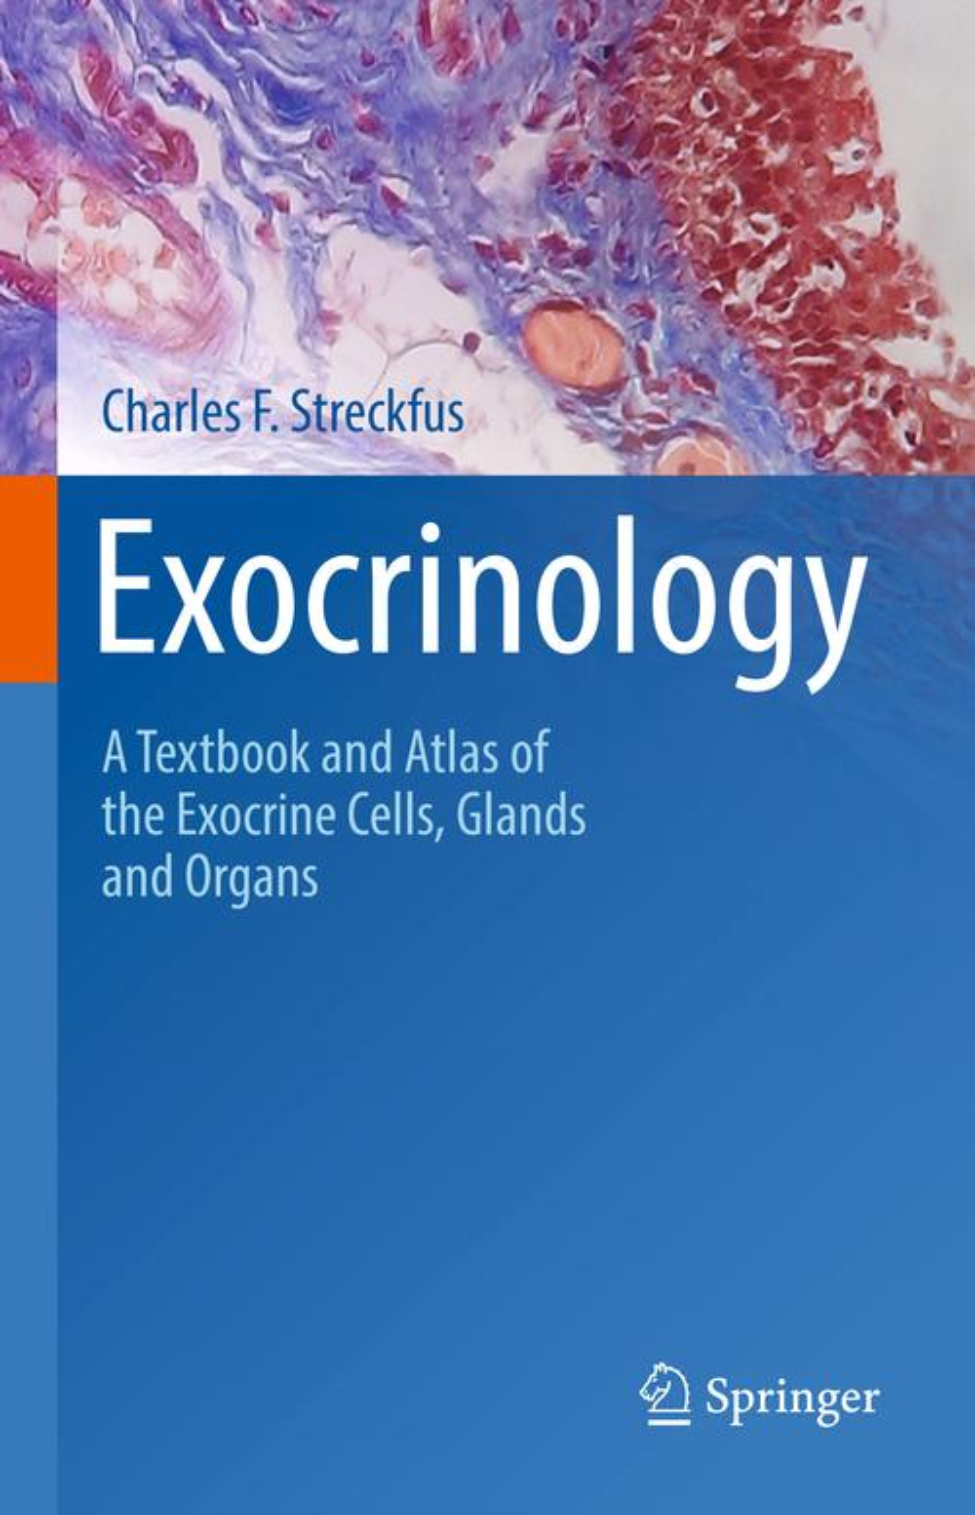 Cover of Dr. Charles F. Streckfus' textbook, Exocrinology: A Textbook and Atlas of Exocrine Cells, Glands and Organs. Published by Springer, the textbook became available as an eBook on March 29.